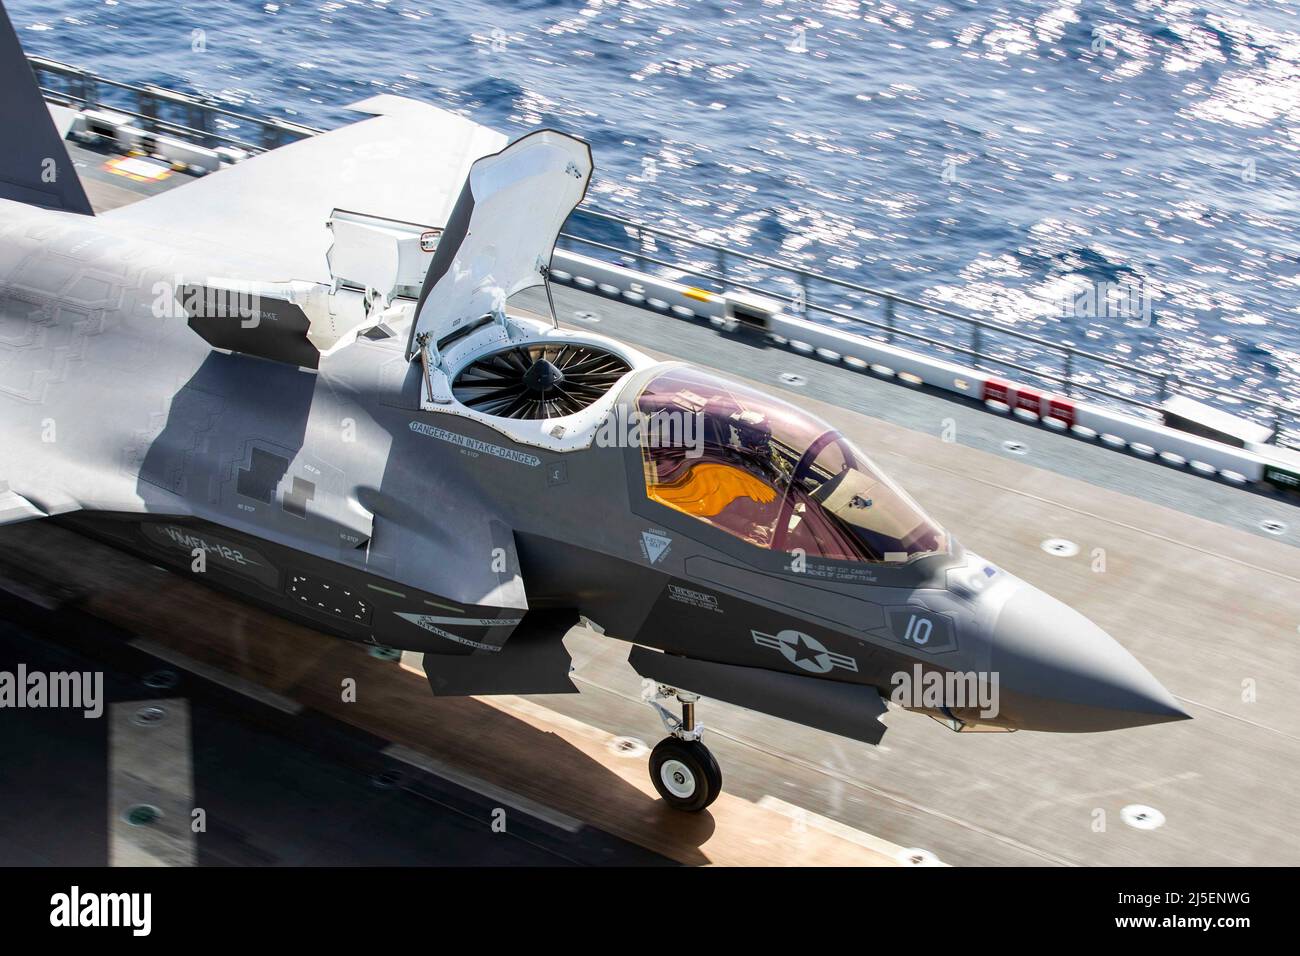 Pacific Ocean, United States. 08 April, 2022. A U.S. Marine Corps F-35B Lightning II aircraft attached to Marine Fighter Attack Squadron 122, prepares to launch from the flight deck of the Navy Wasp-class amphibious assault ship USS Tripoli during a routine deployment with the 3rd Fleet, April 8, 2021 off the coast of California, USA.  Credit: MC2 Theodore Quintana/U.S. Navy/Alamy Live News Stock Photo